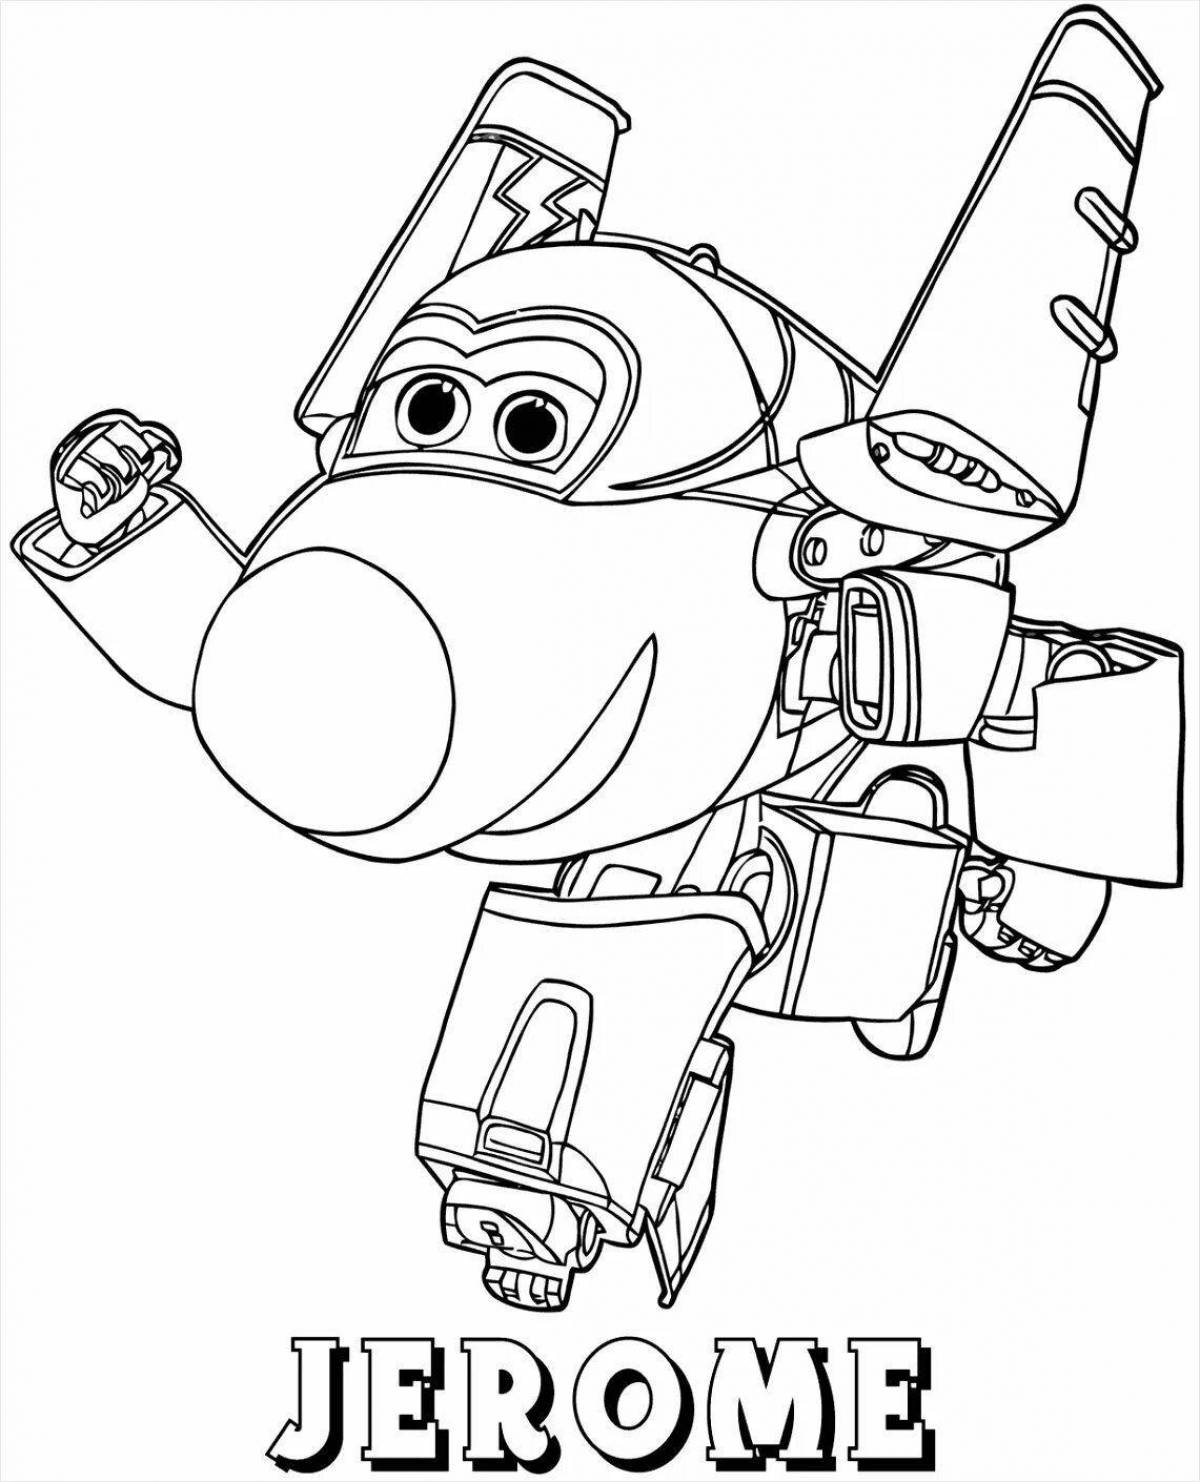 Grand Jet Coloring Page